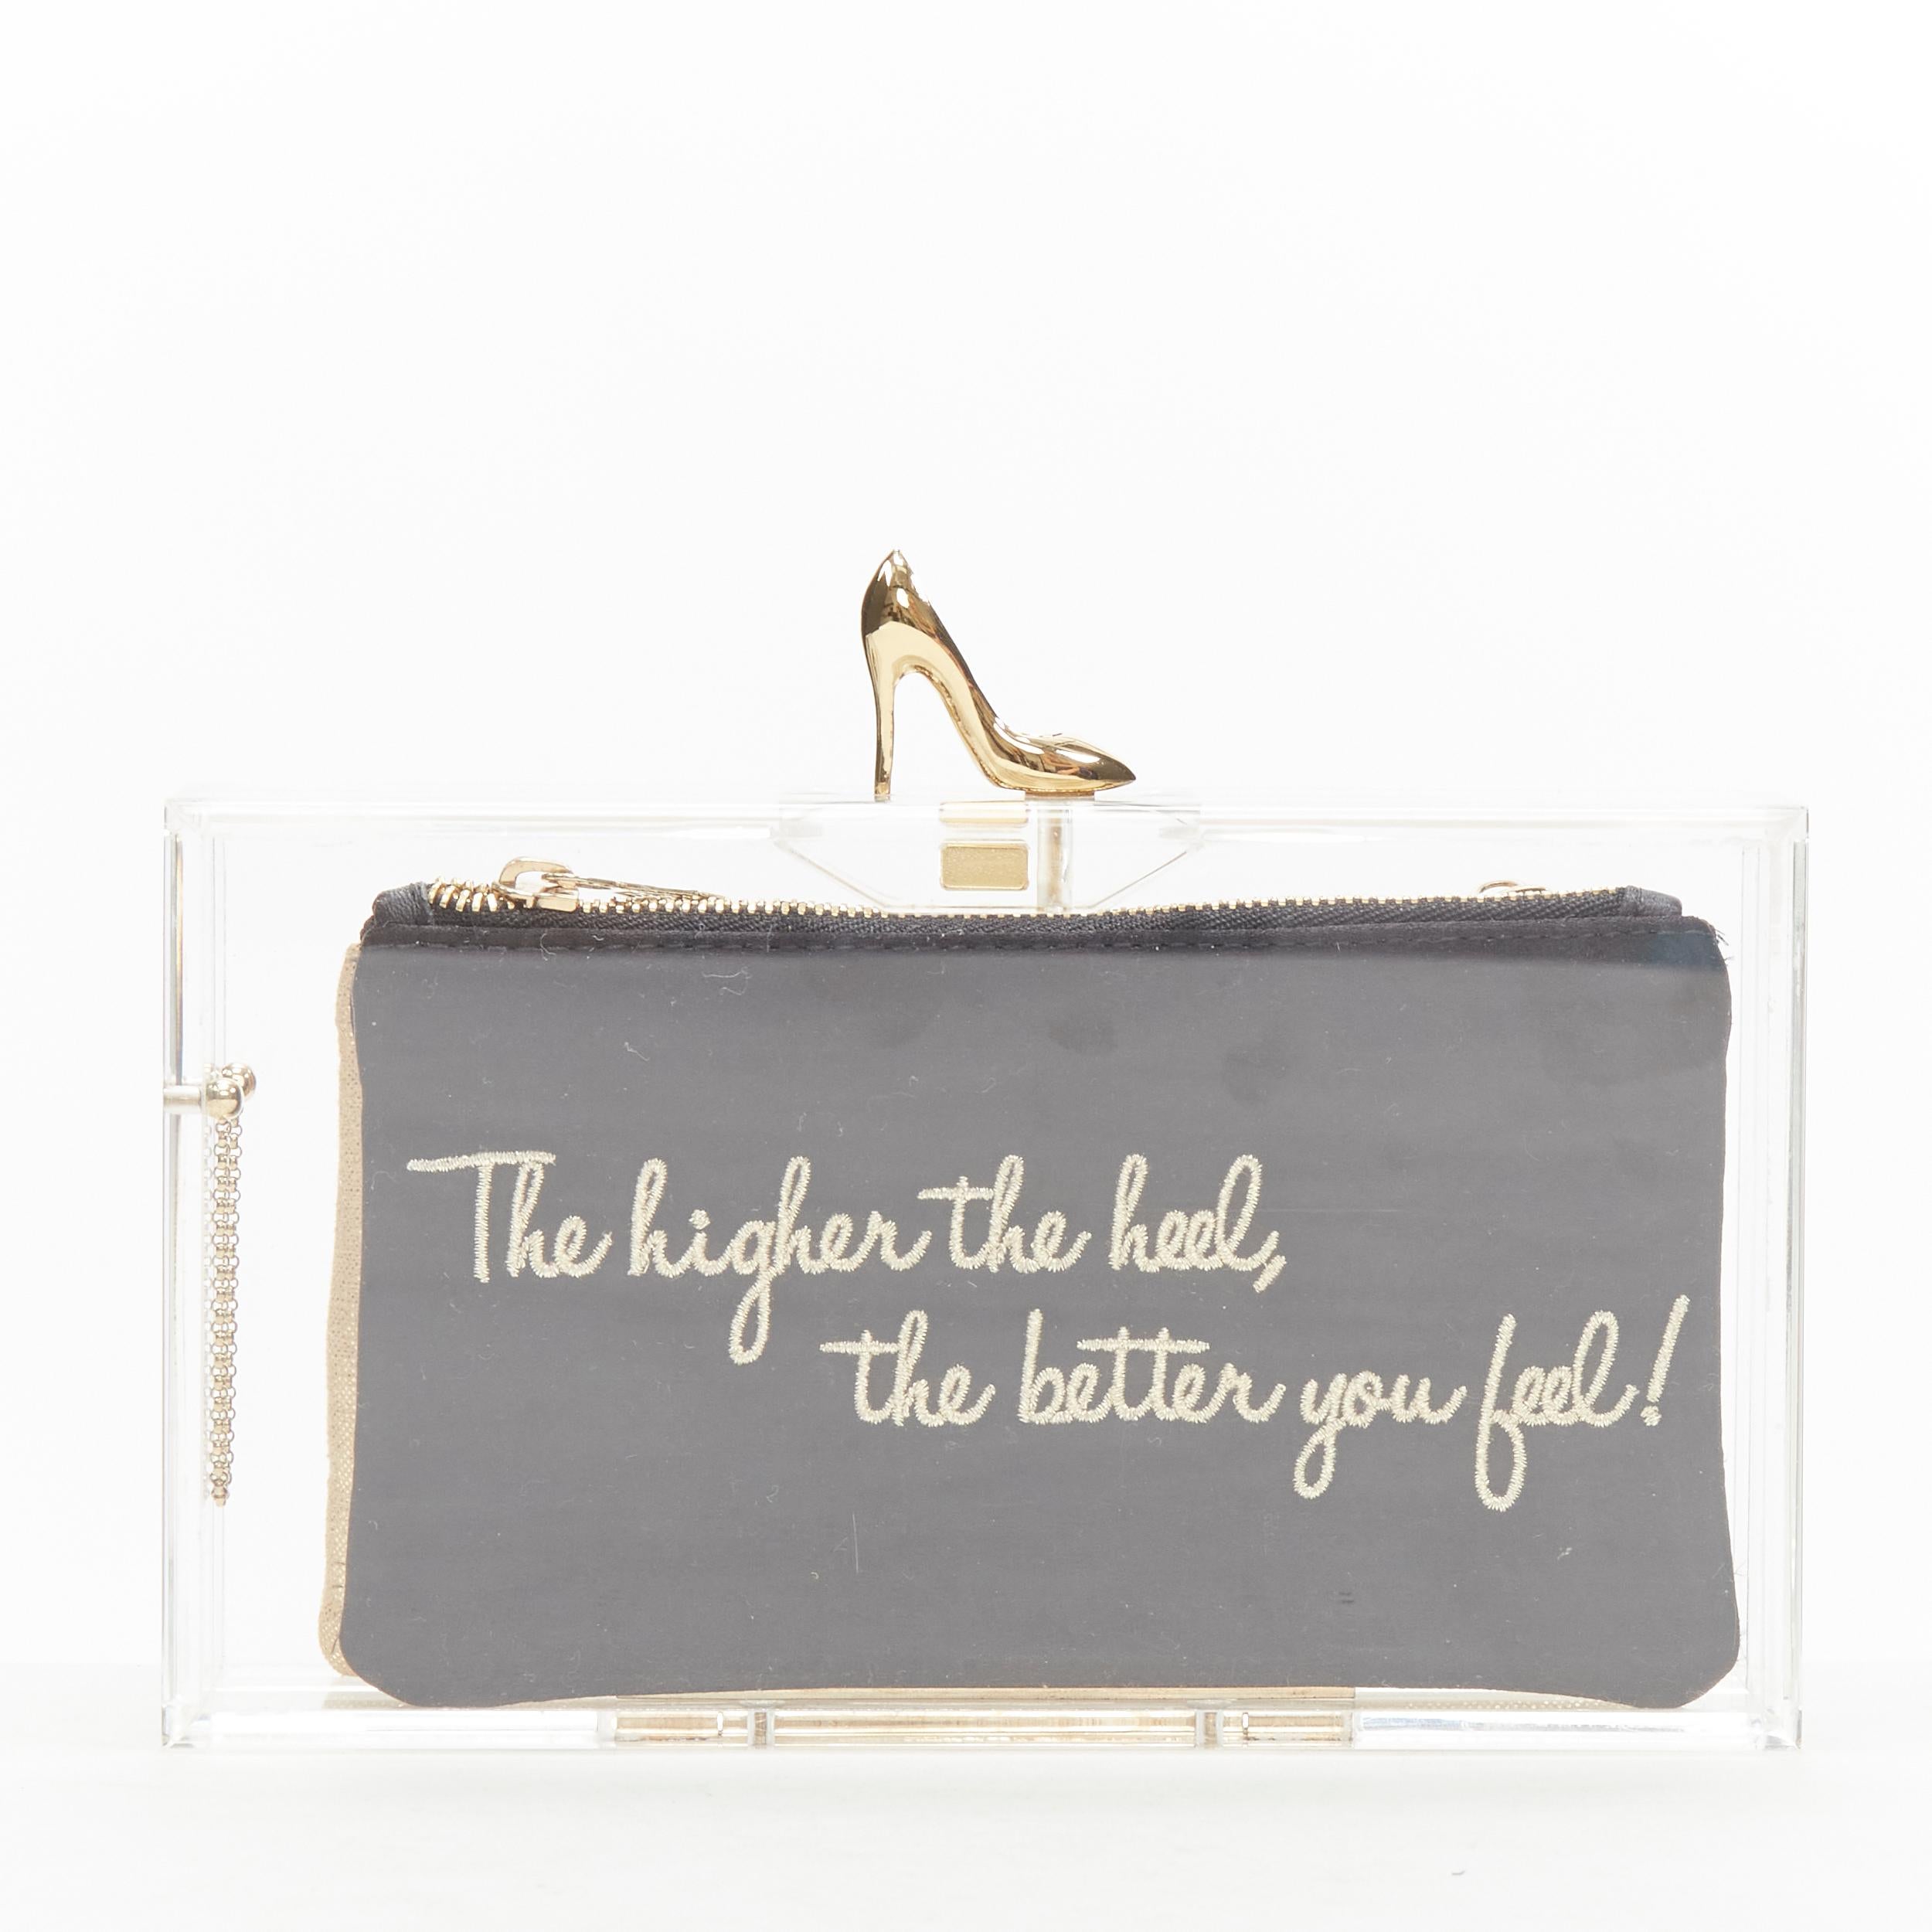 CHARLOTTE OLYMPIA gold shoe embroidery pouch perspex acrylic box clutch bag 1